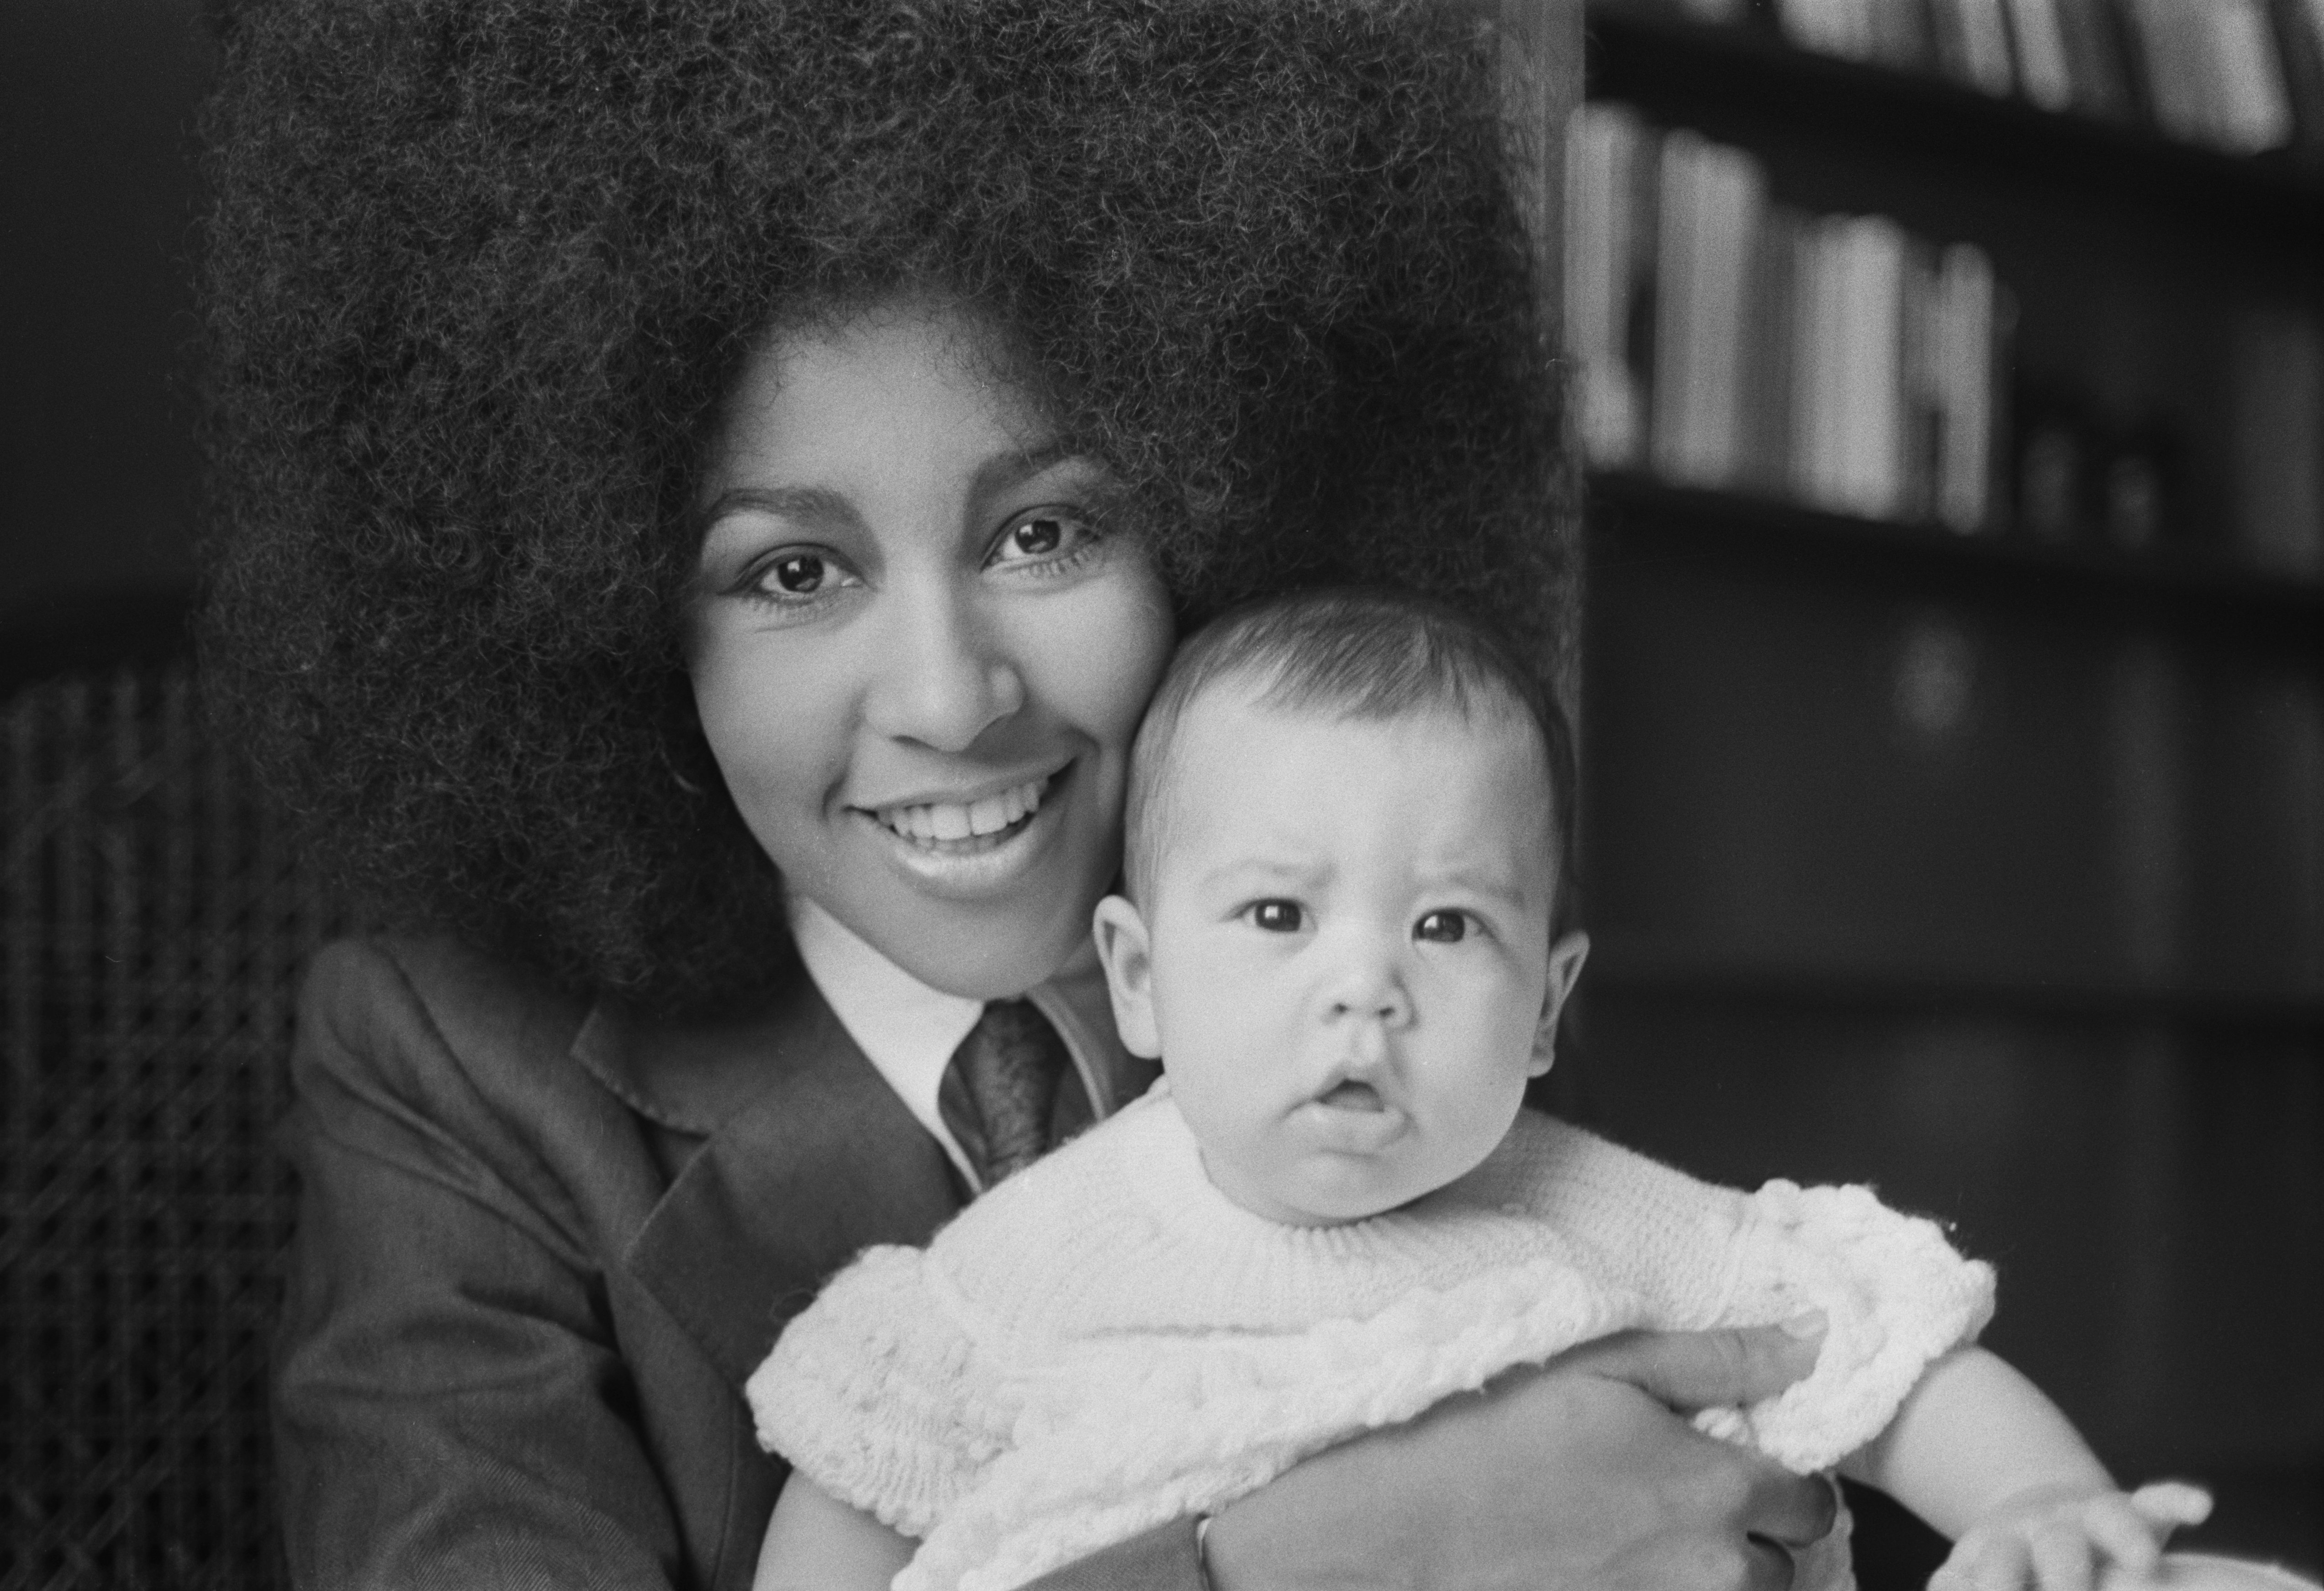 Karis and her mother, Marsha Hunt on March 23, 1971 | Source: Getty Images